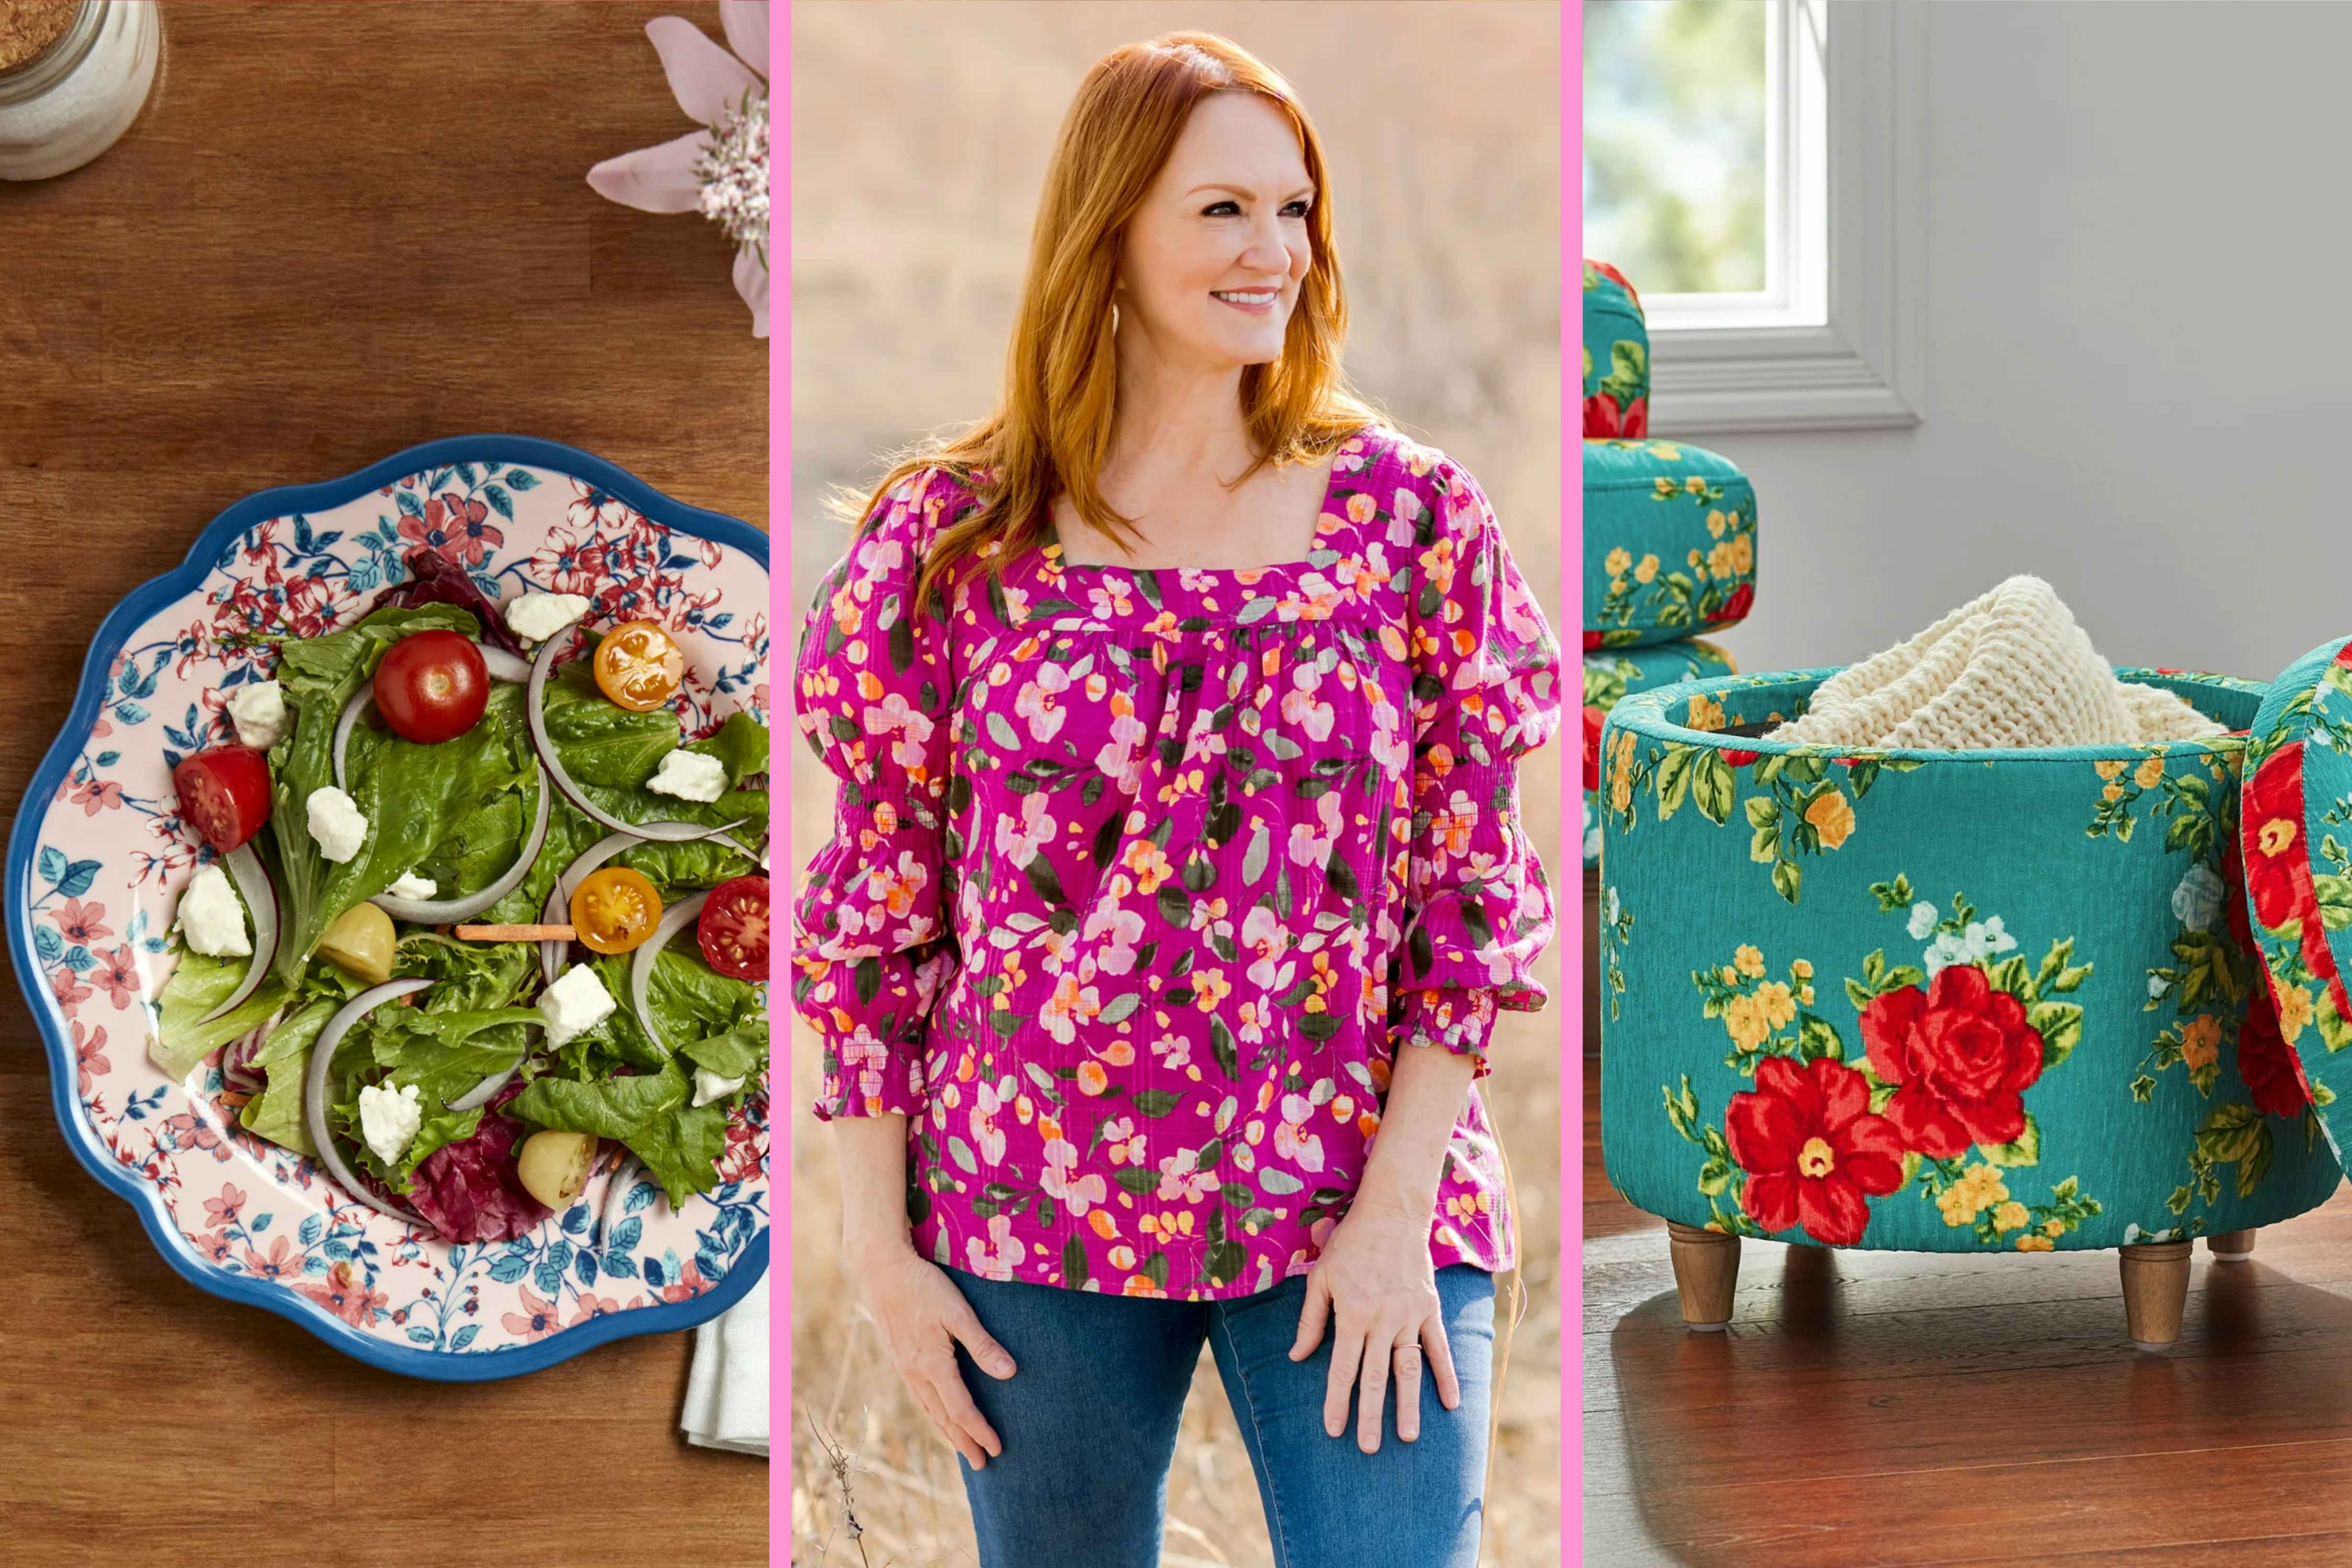 The Pioneer Woman Clearance Finds at Walmart: Save Up to 50%